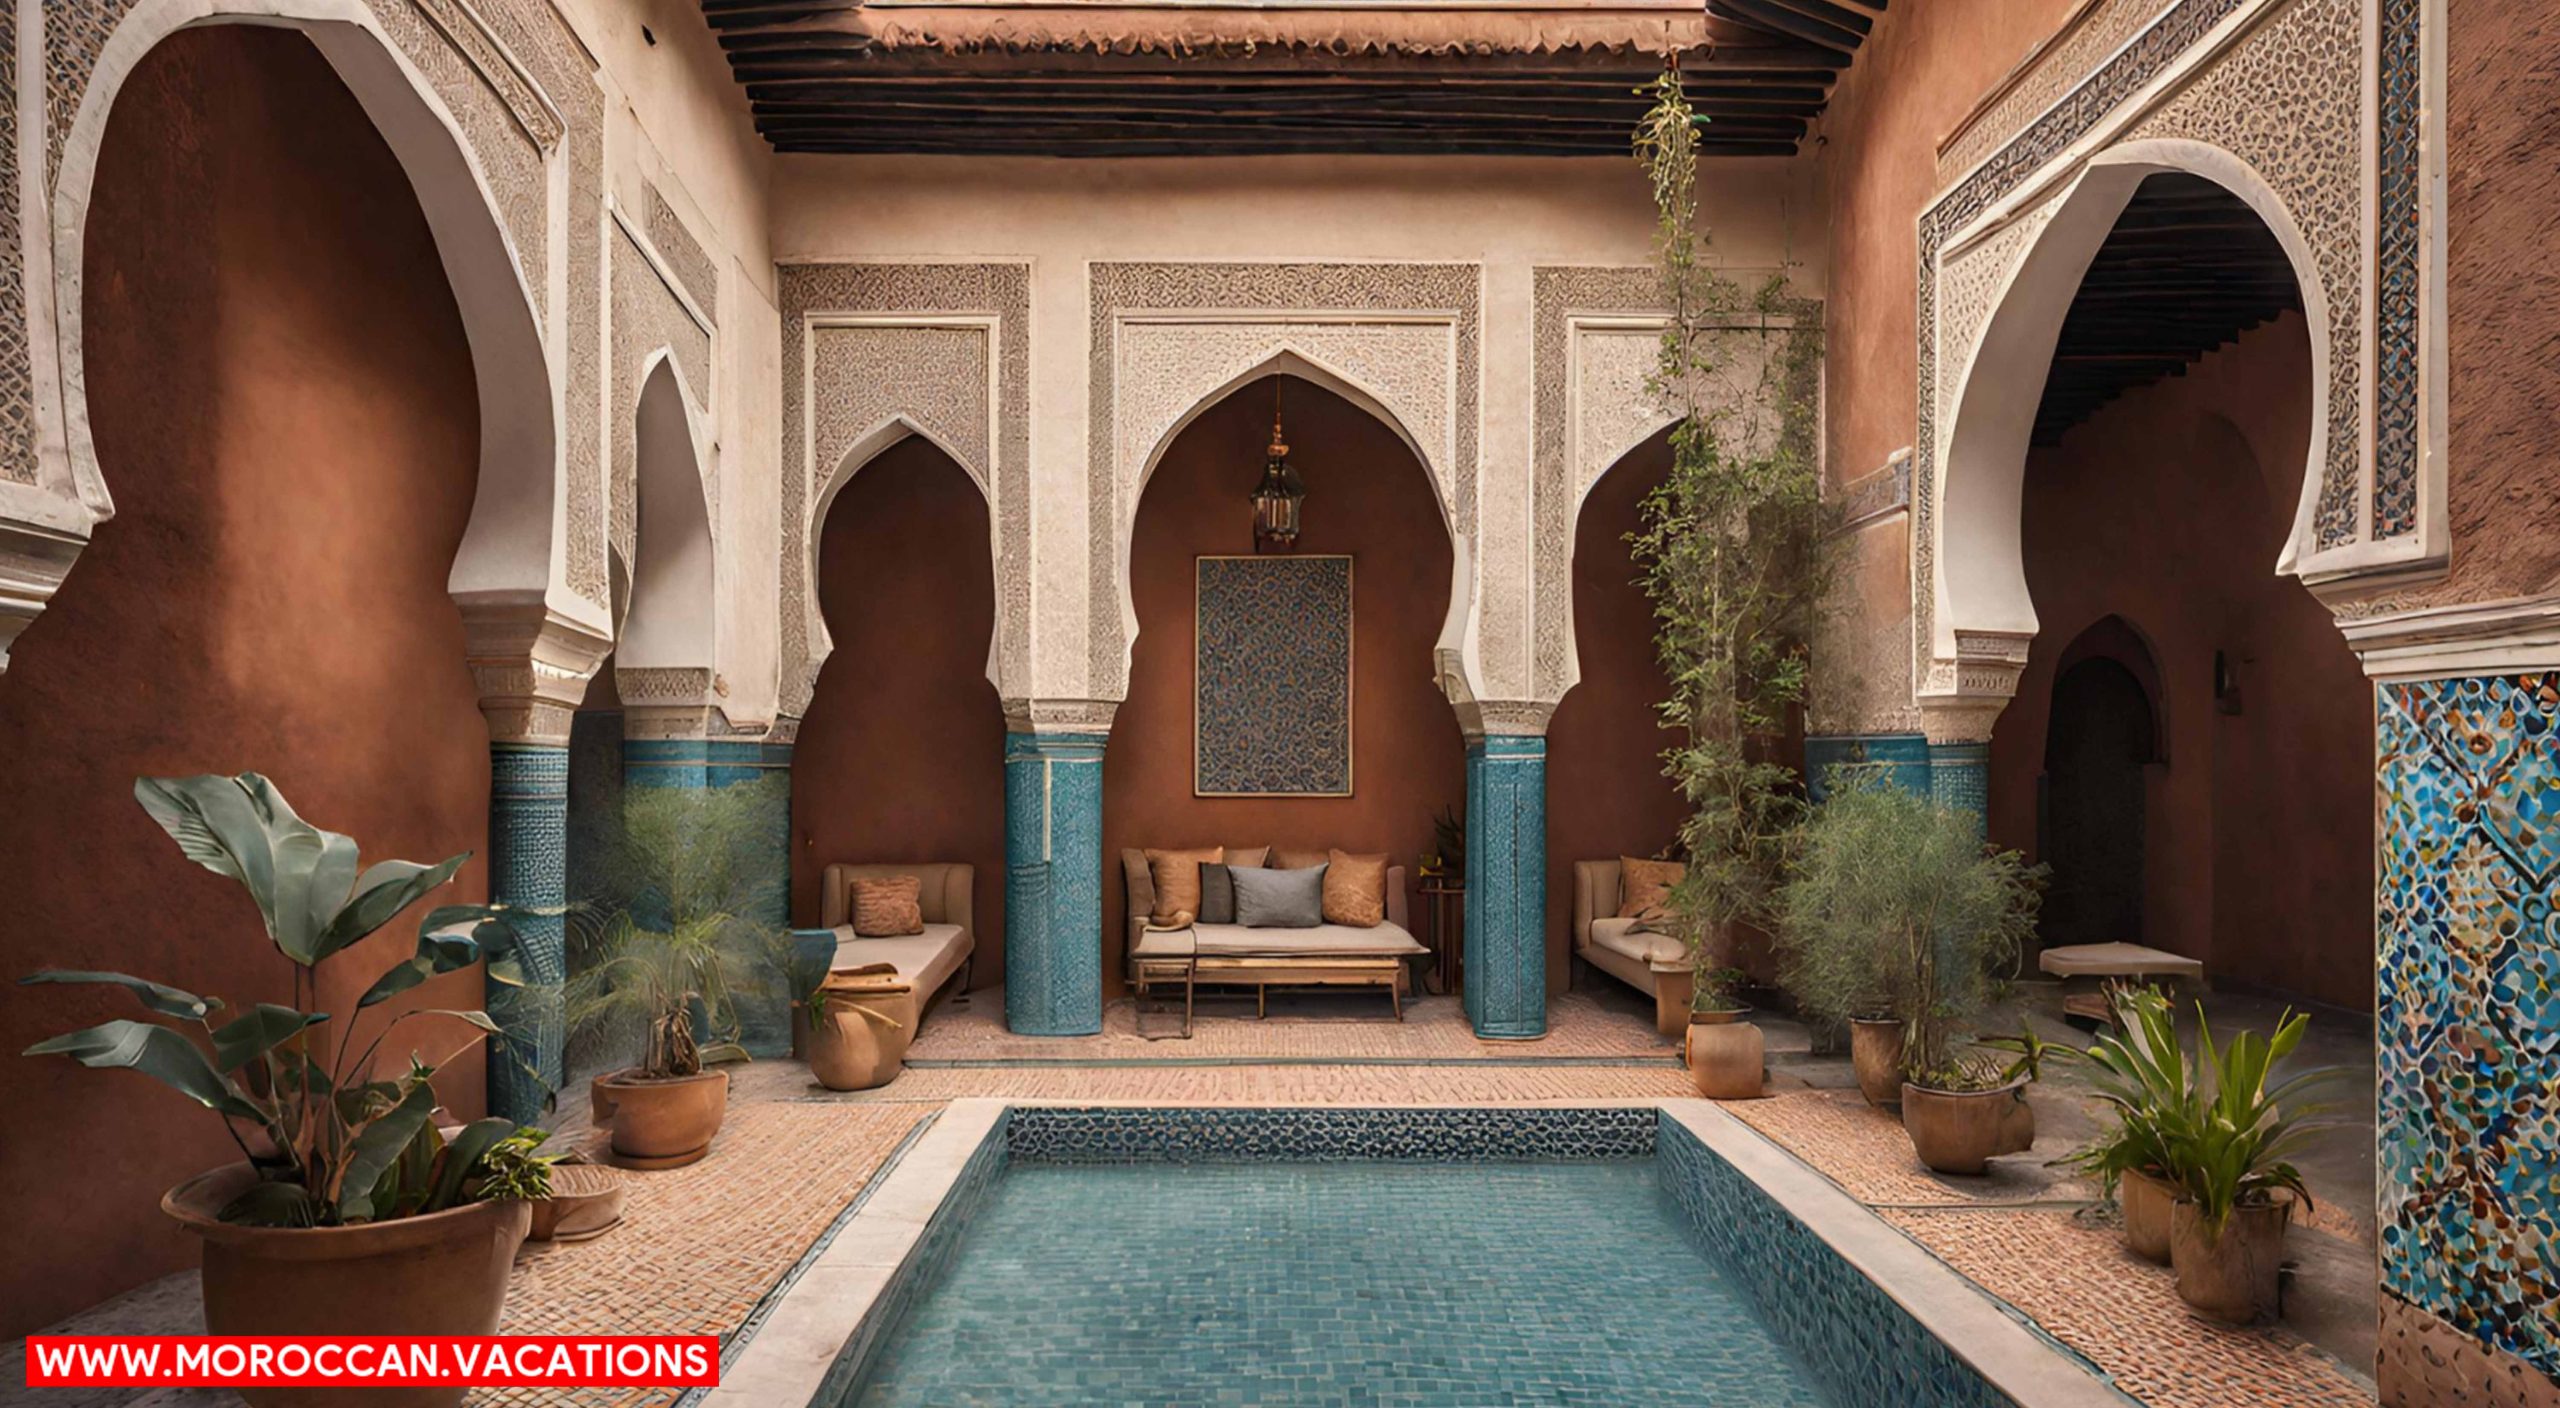 The evolution of riads in Marrakesh's architectural history.